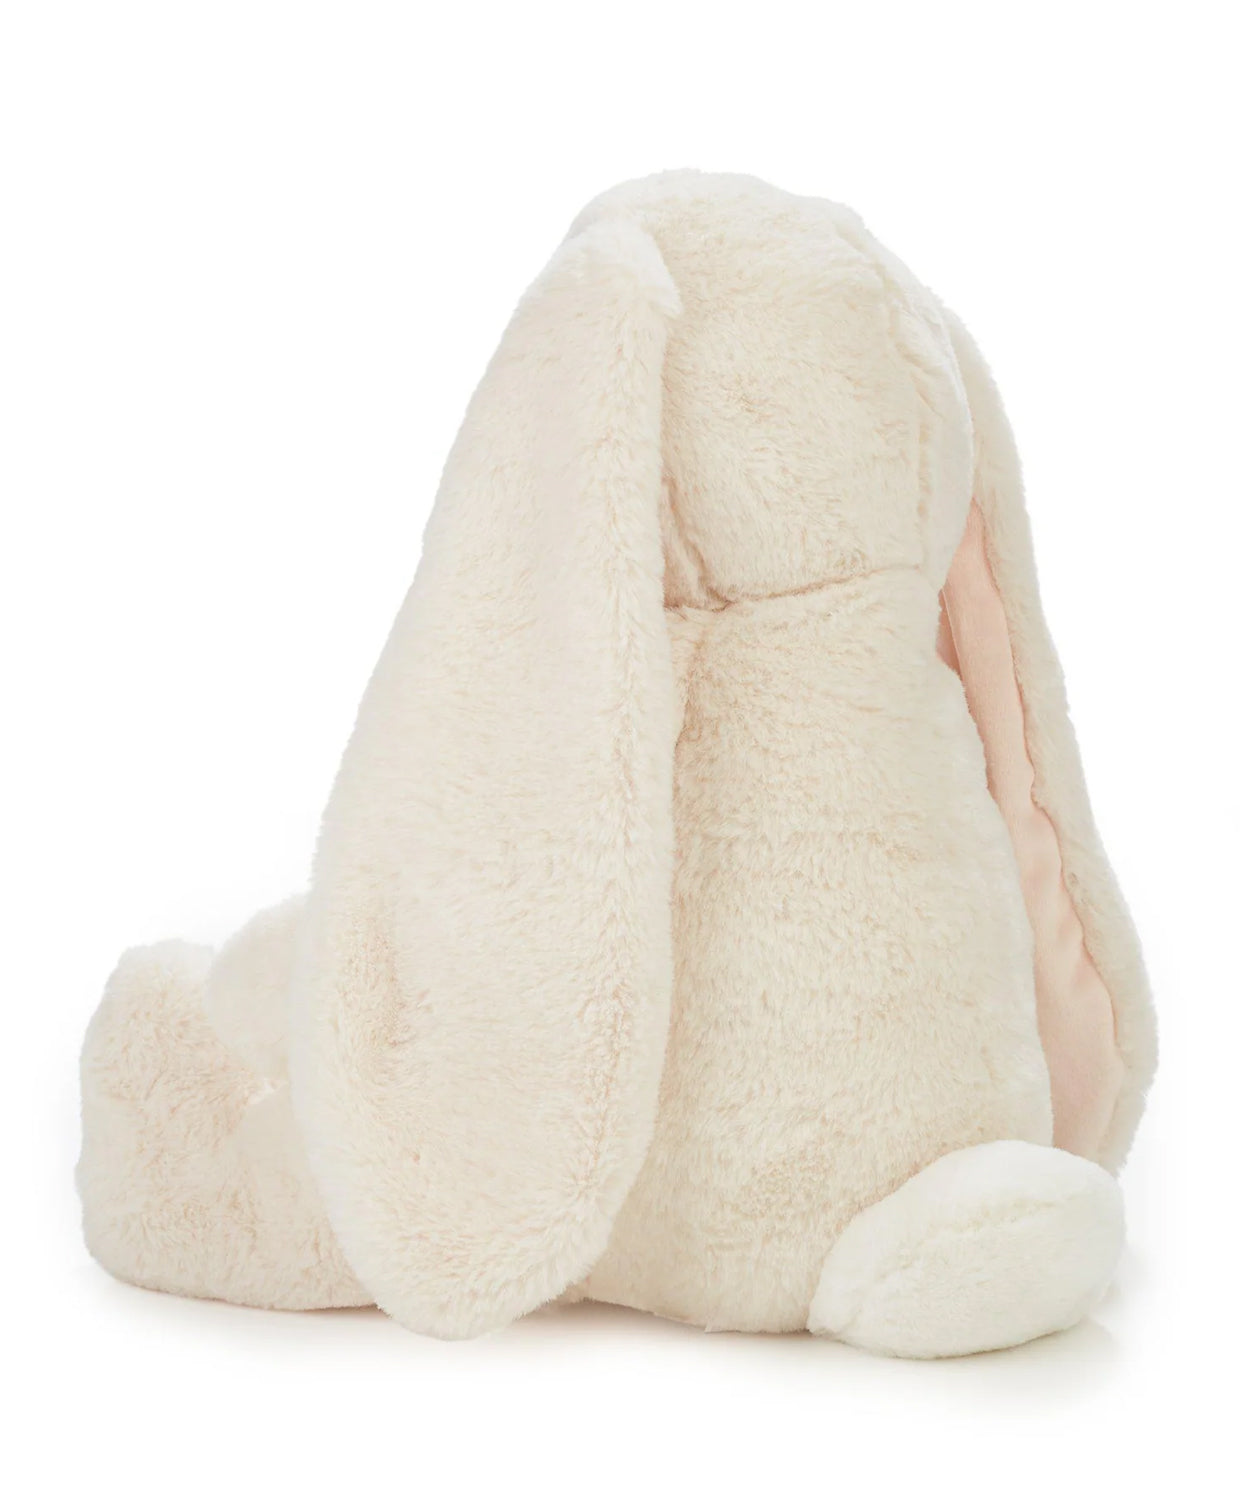 An enormous soft, plush white rabbit with long floppy ears sits upright on a white background viewed from behind.